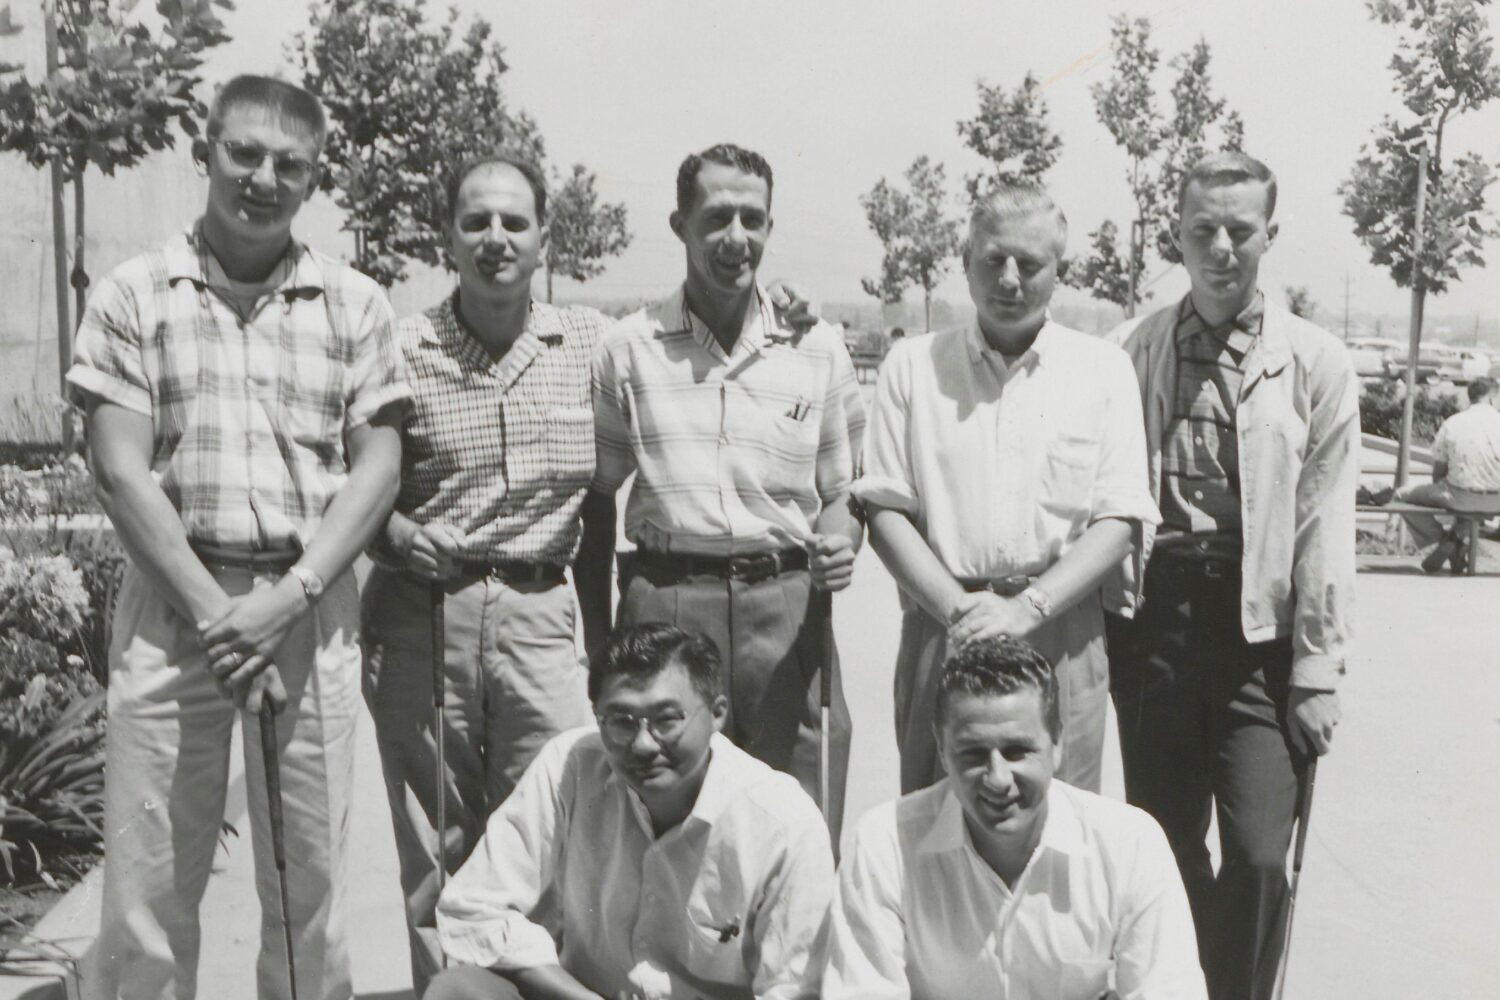 A group of HP employees including Yas Shimoguchi (left foreground), reportedly the first Japanese American ever hired by HP.